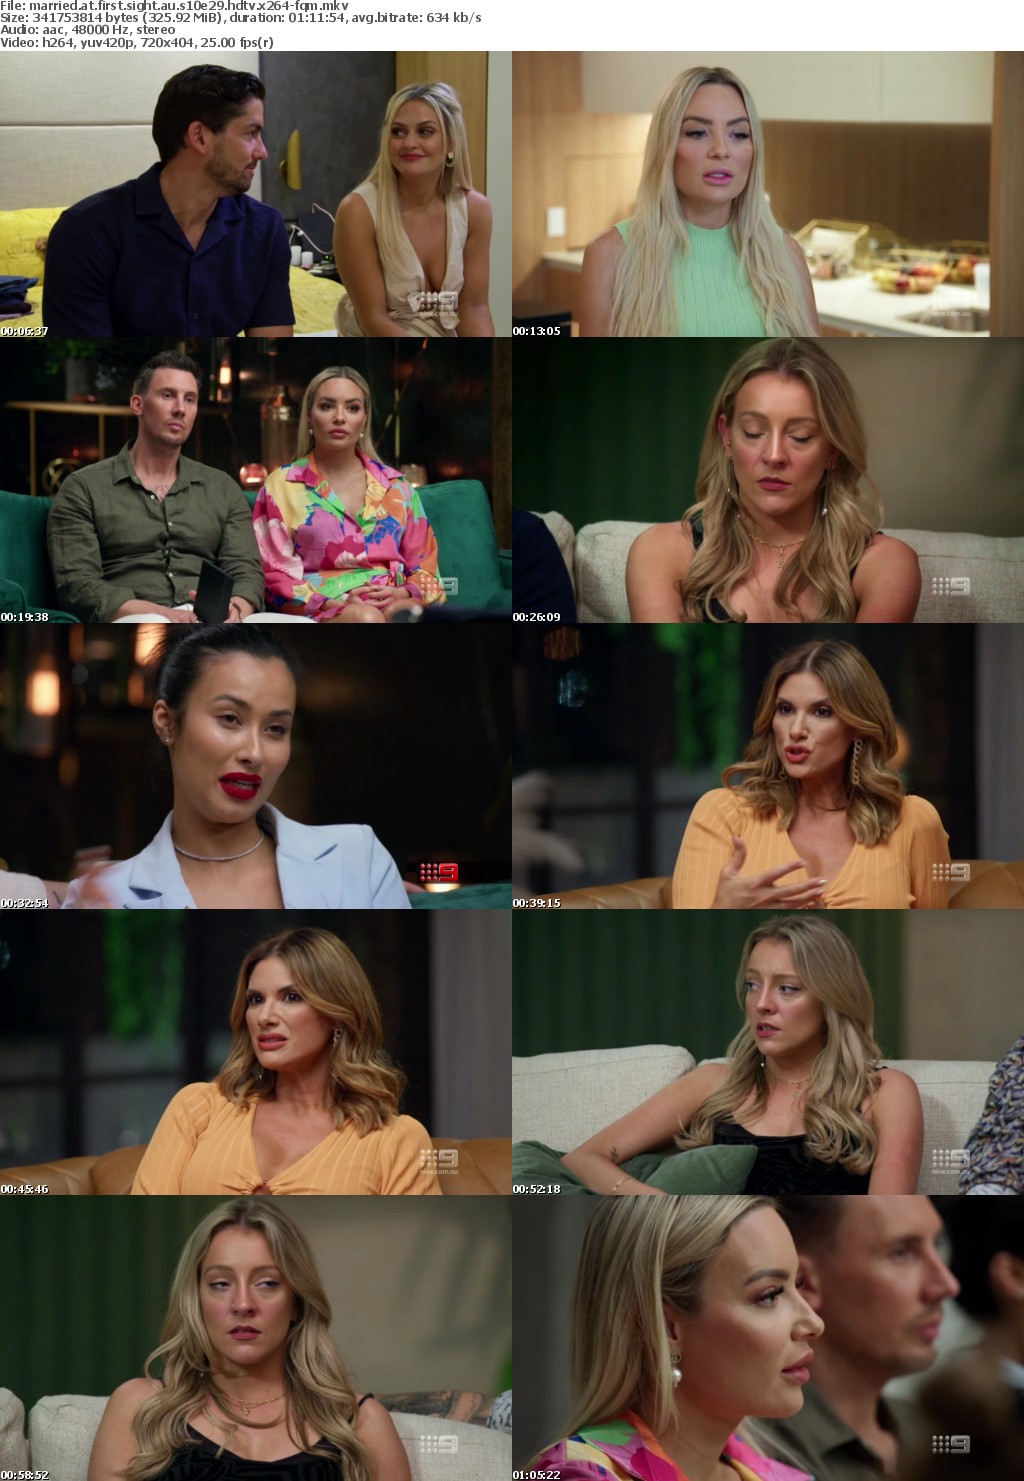 Married At First Sight AU S10E29 HDTV x264-FQM